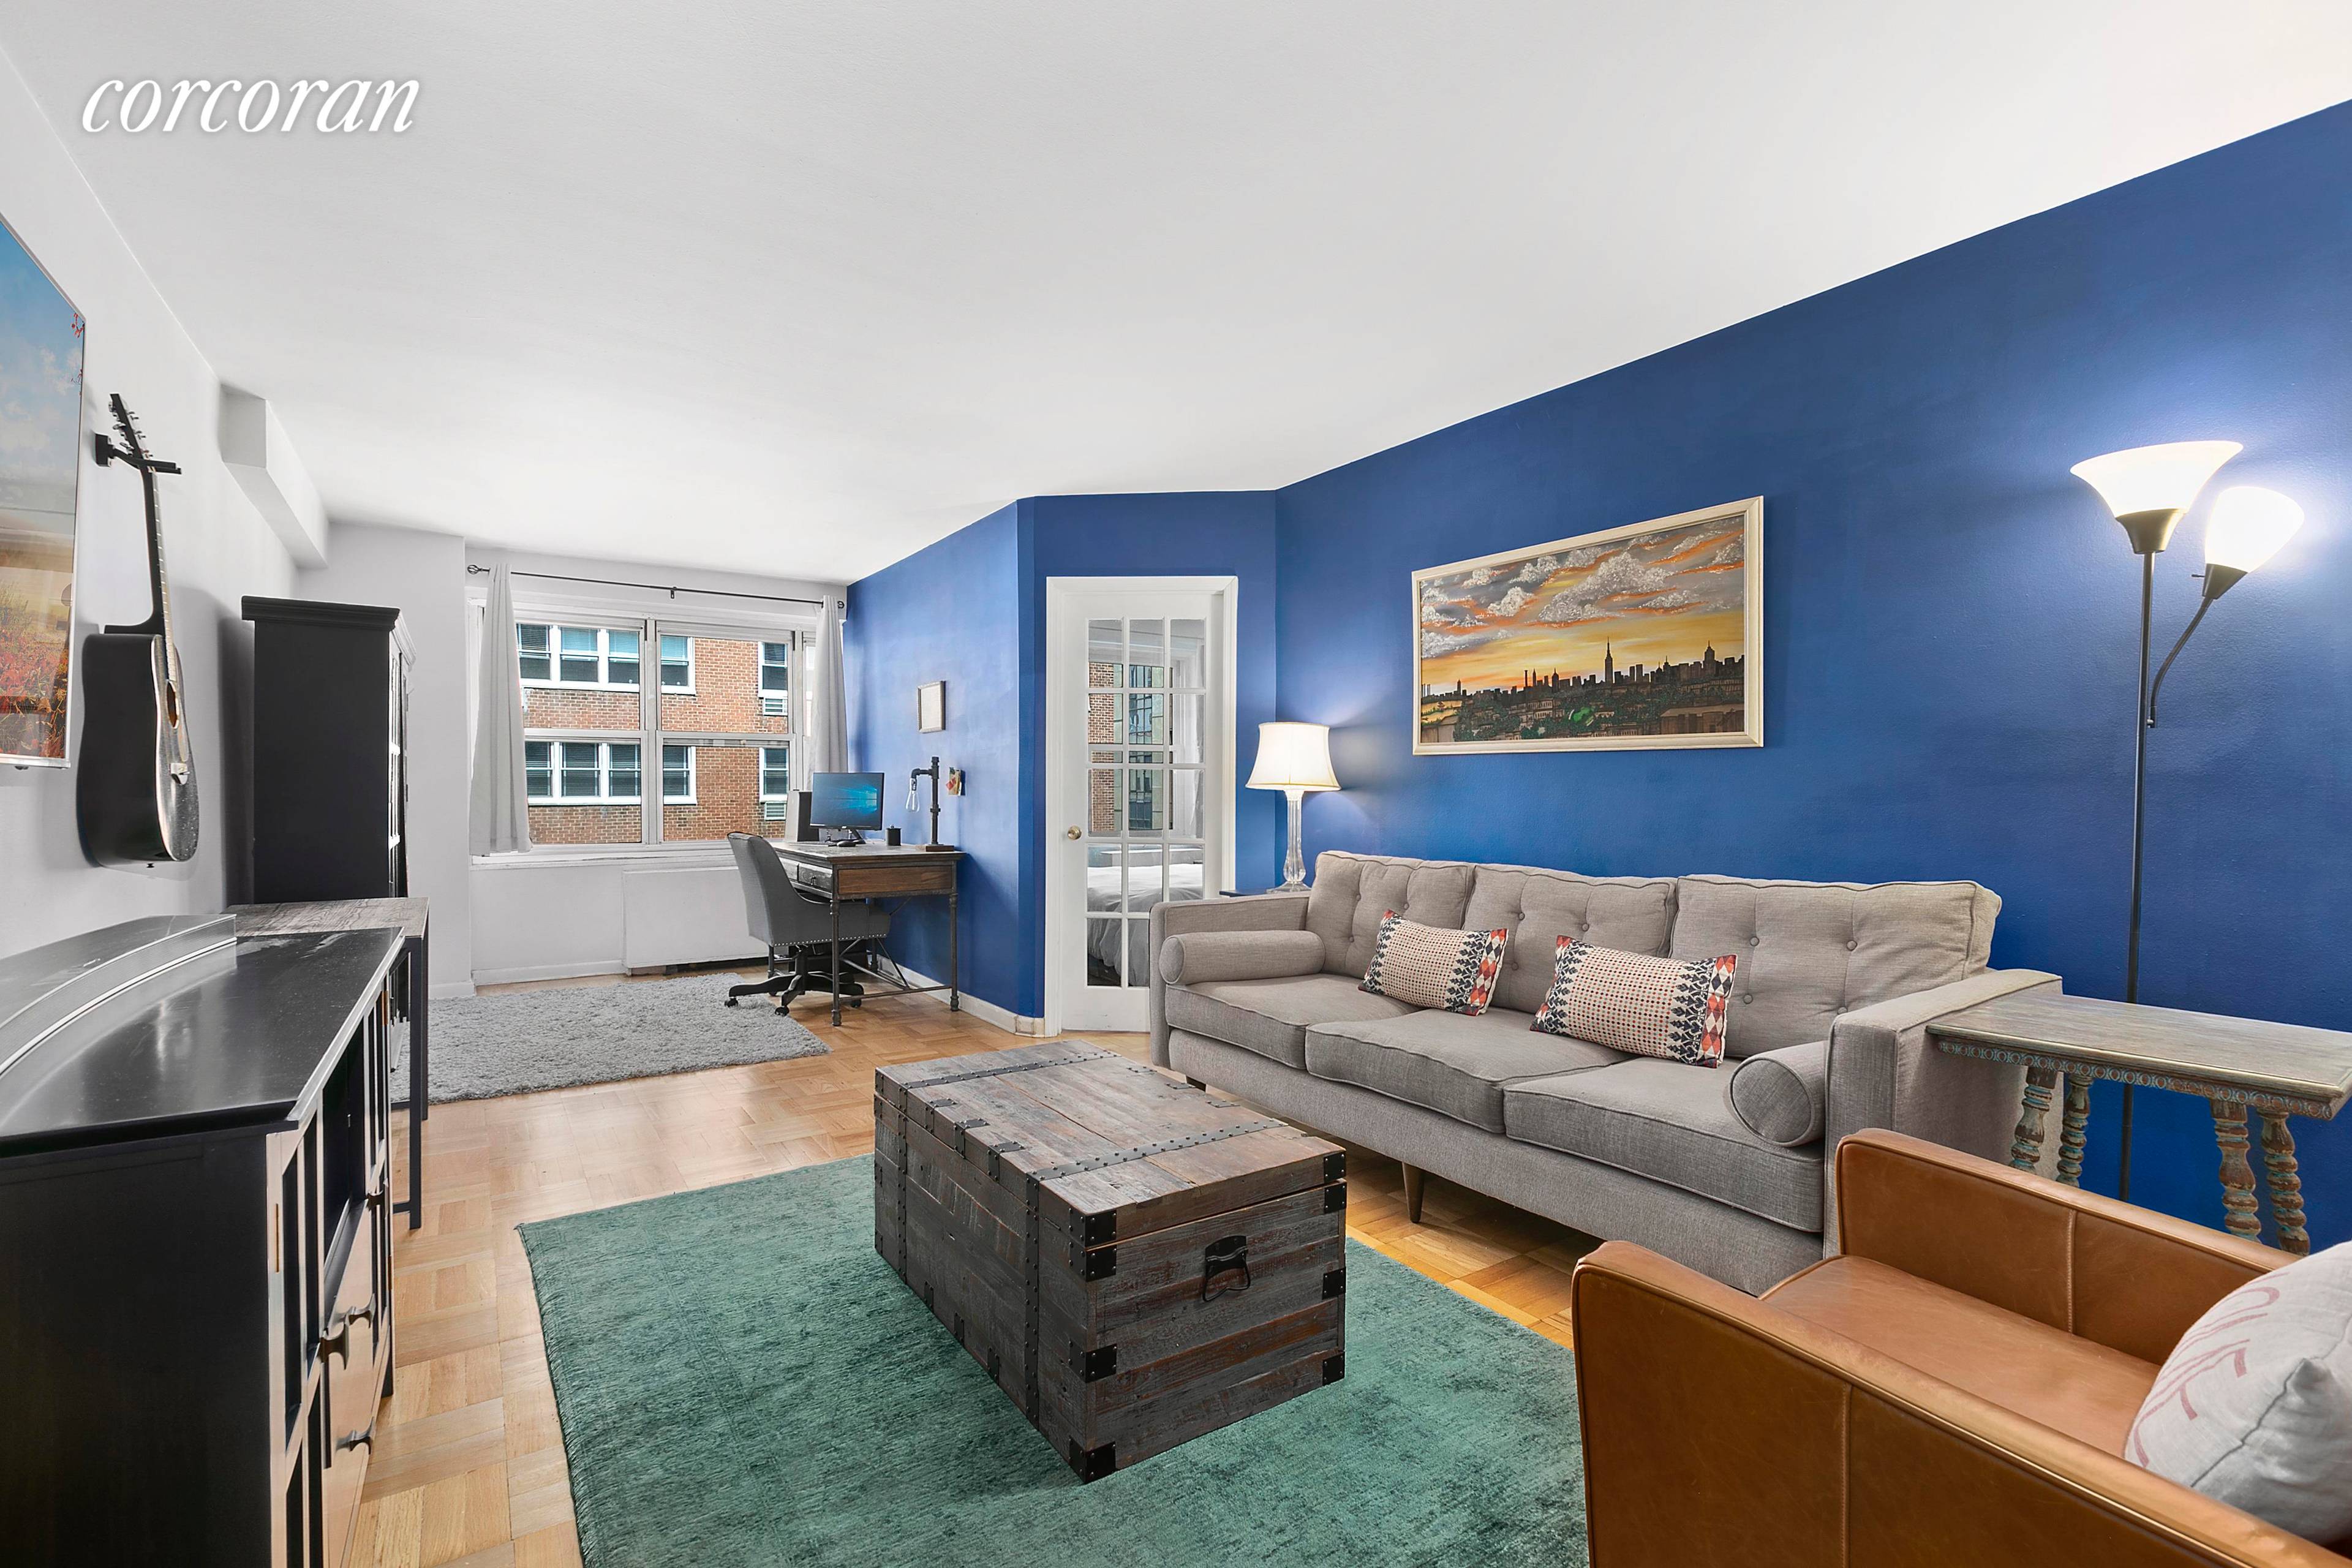 Enjoy large living spaces, with room to work from home, and excellent storage in this one bedroom, one bath home in one of New York CityA s best neighborhoods.